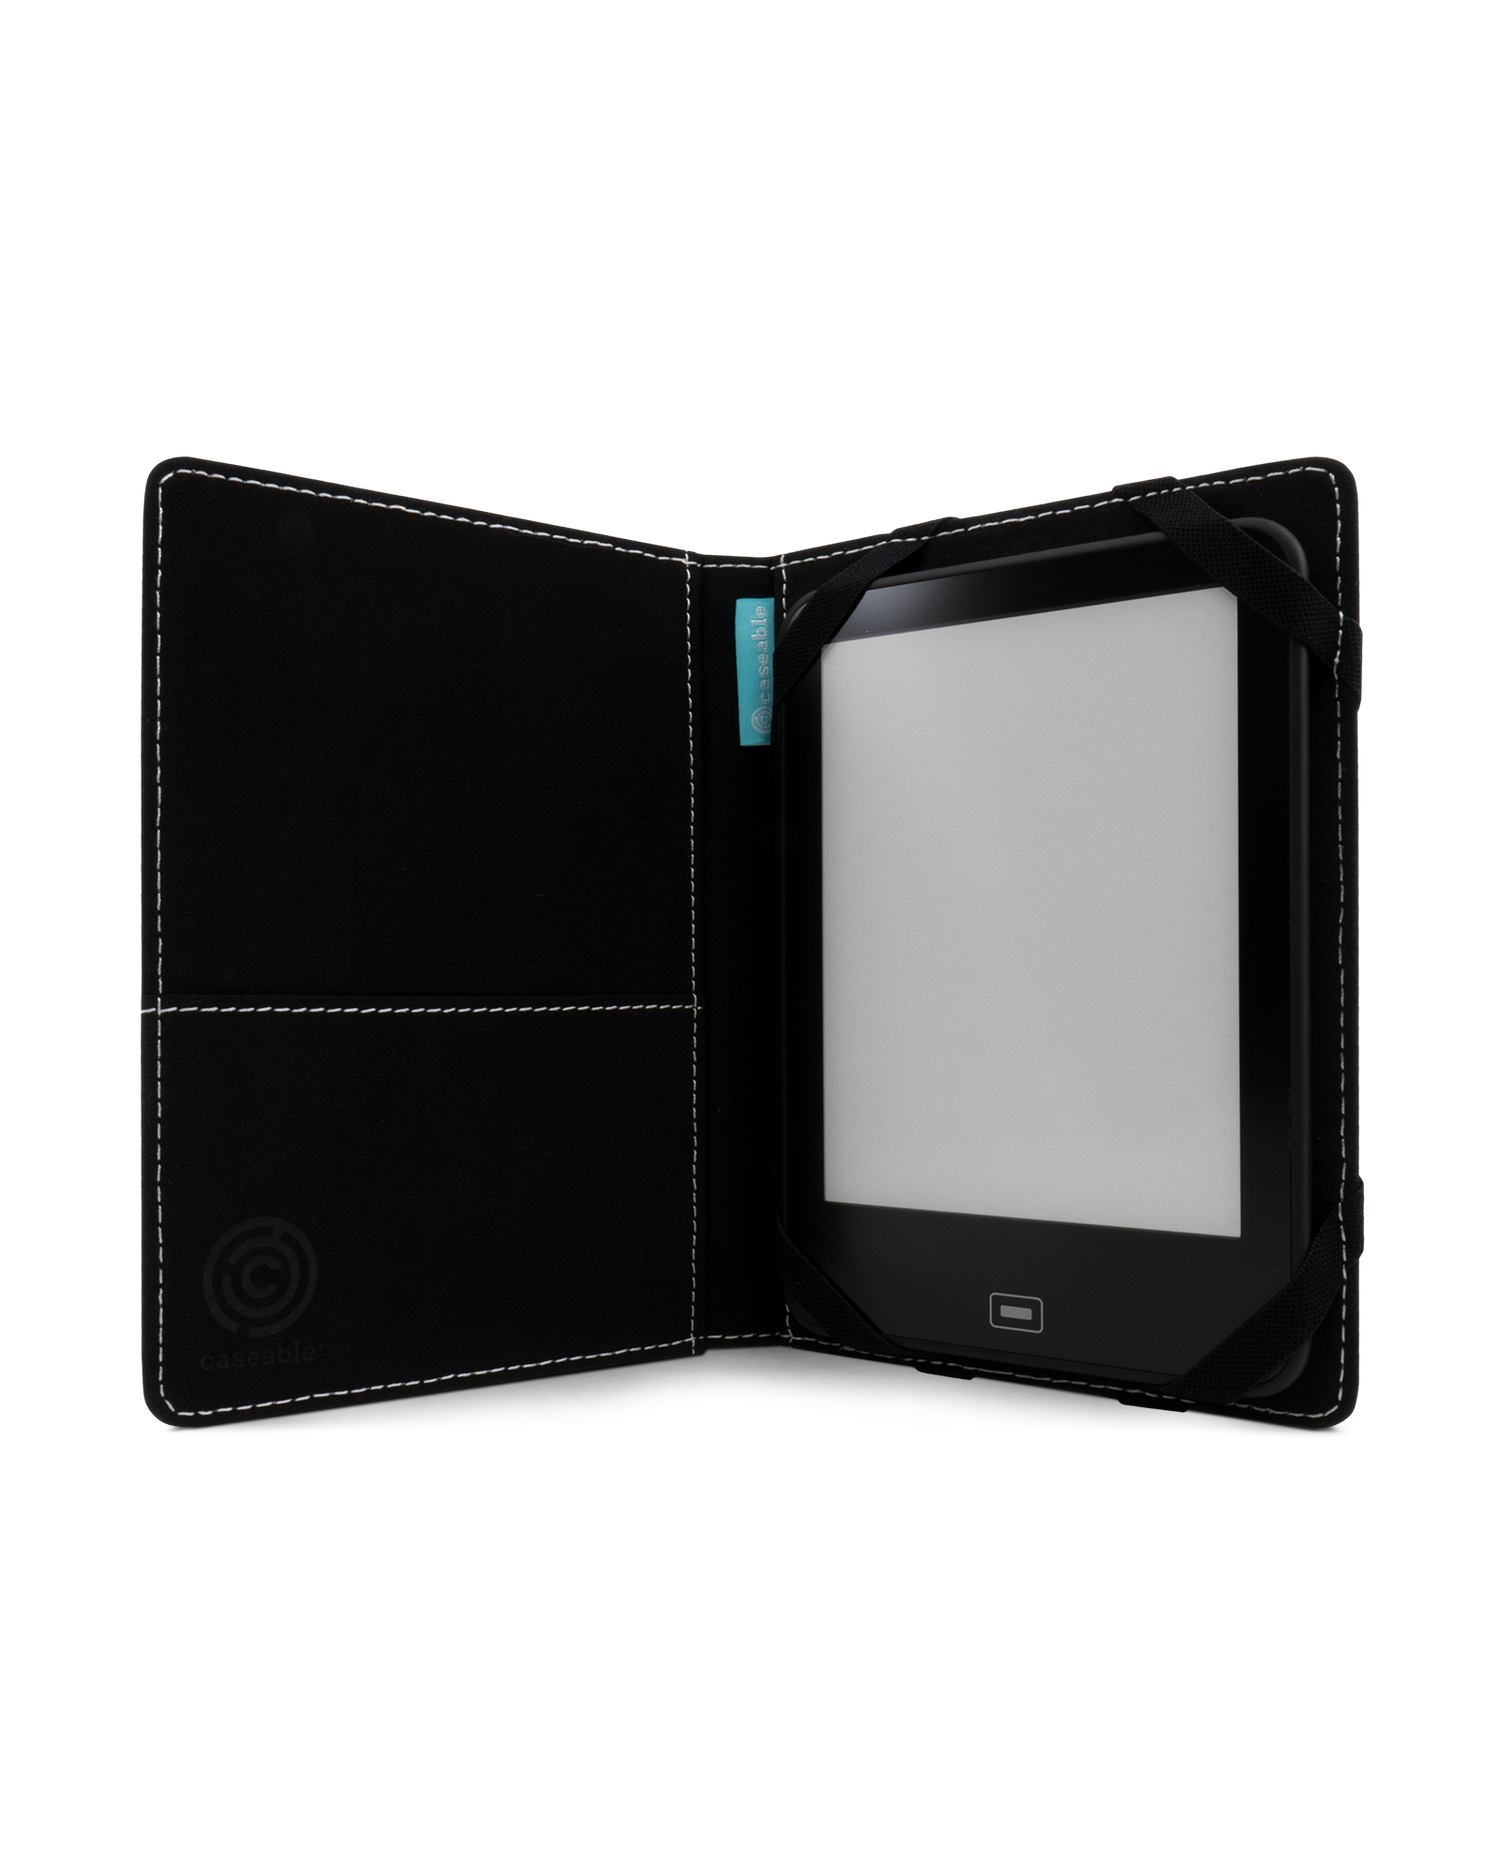 Have A Day eReader Case S: Opened interior view